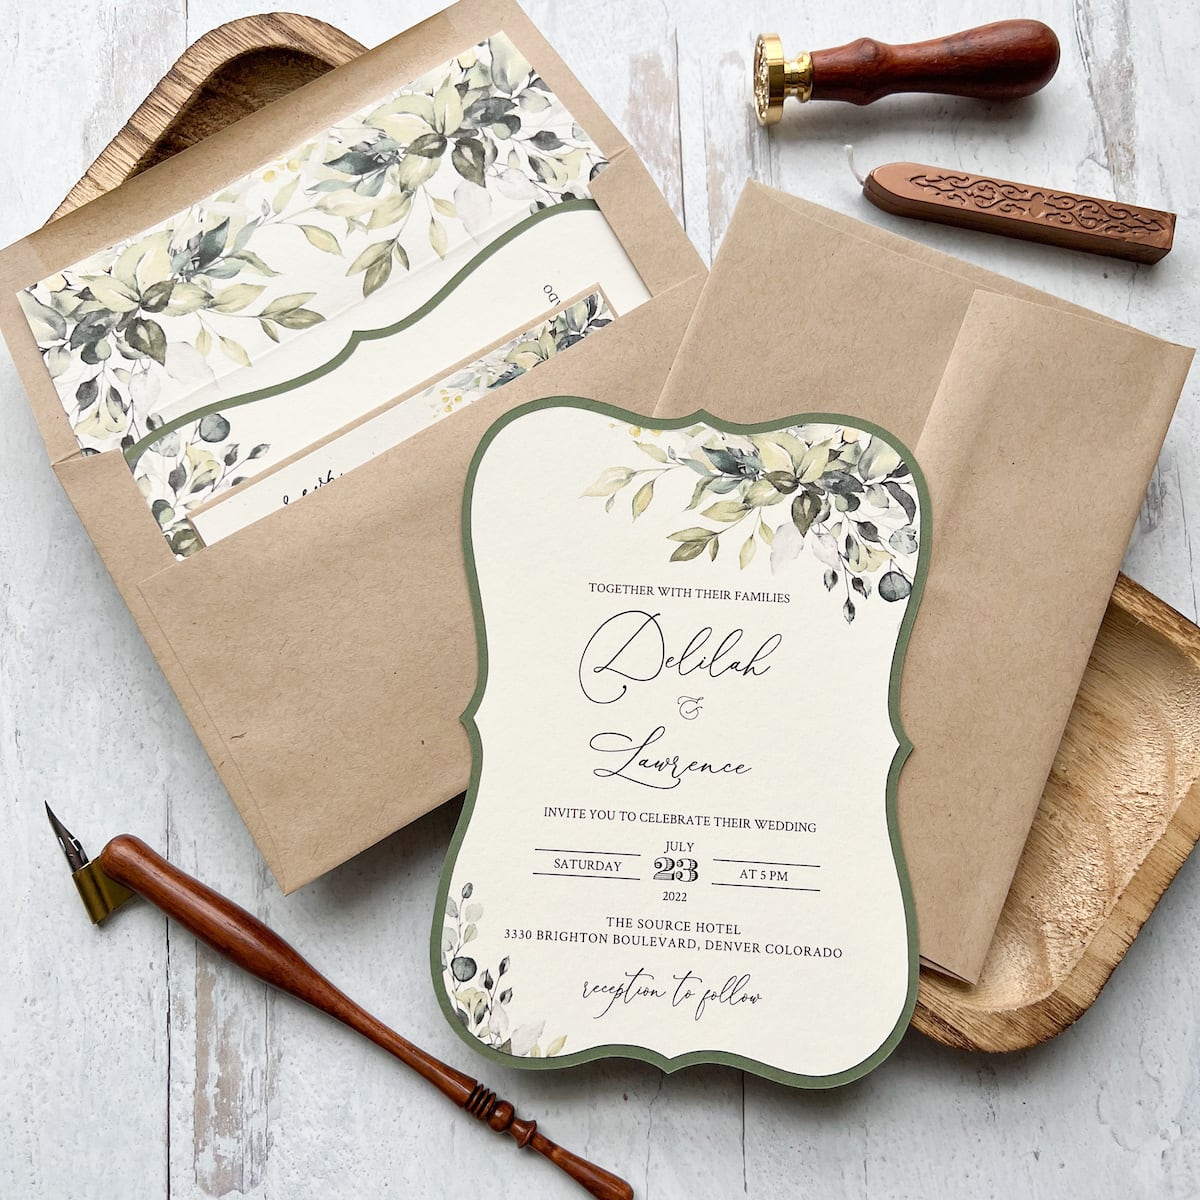 How To Choose The Best Paper Weight for Wedding Invitations